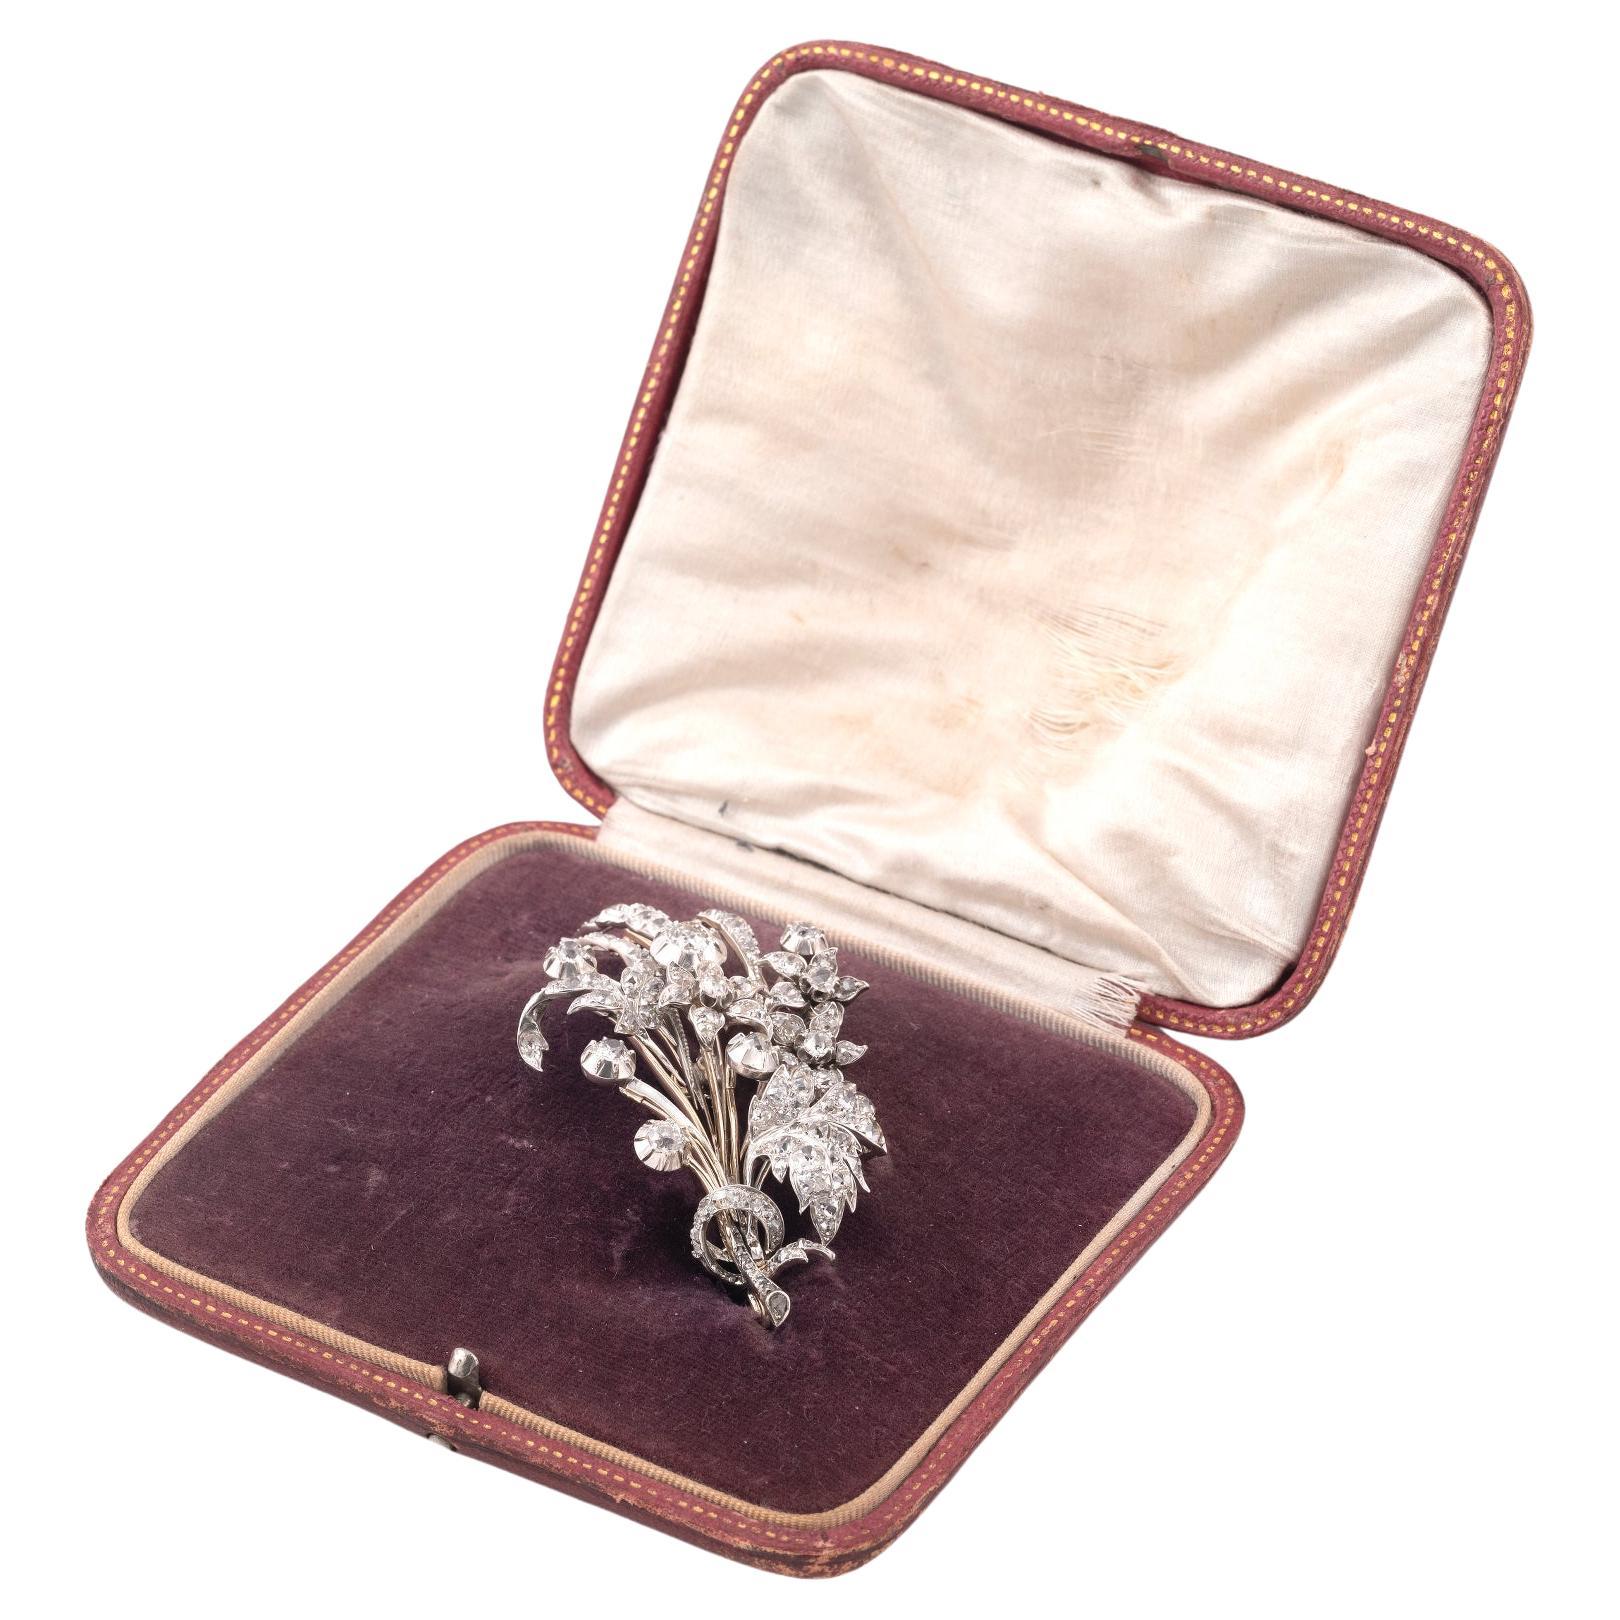 A Victorian diamond brooch, late 19th century, designed as a spray of flowers, set with circular- and rose-cut diamonds approximately 6,5ct, length 8cm.
With fitted case.